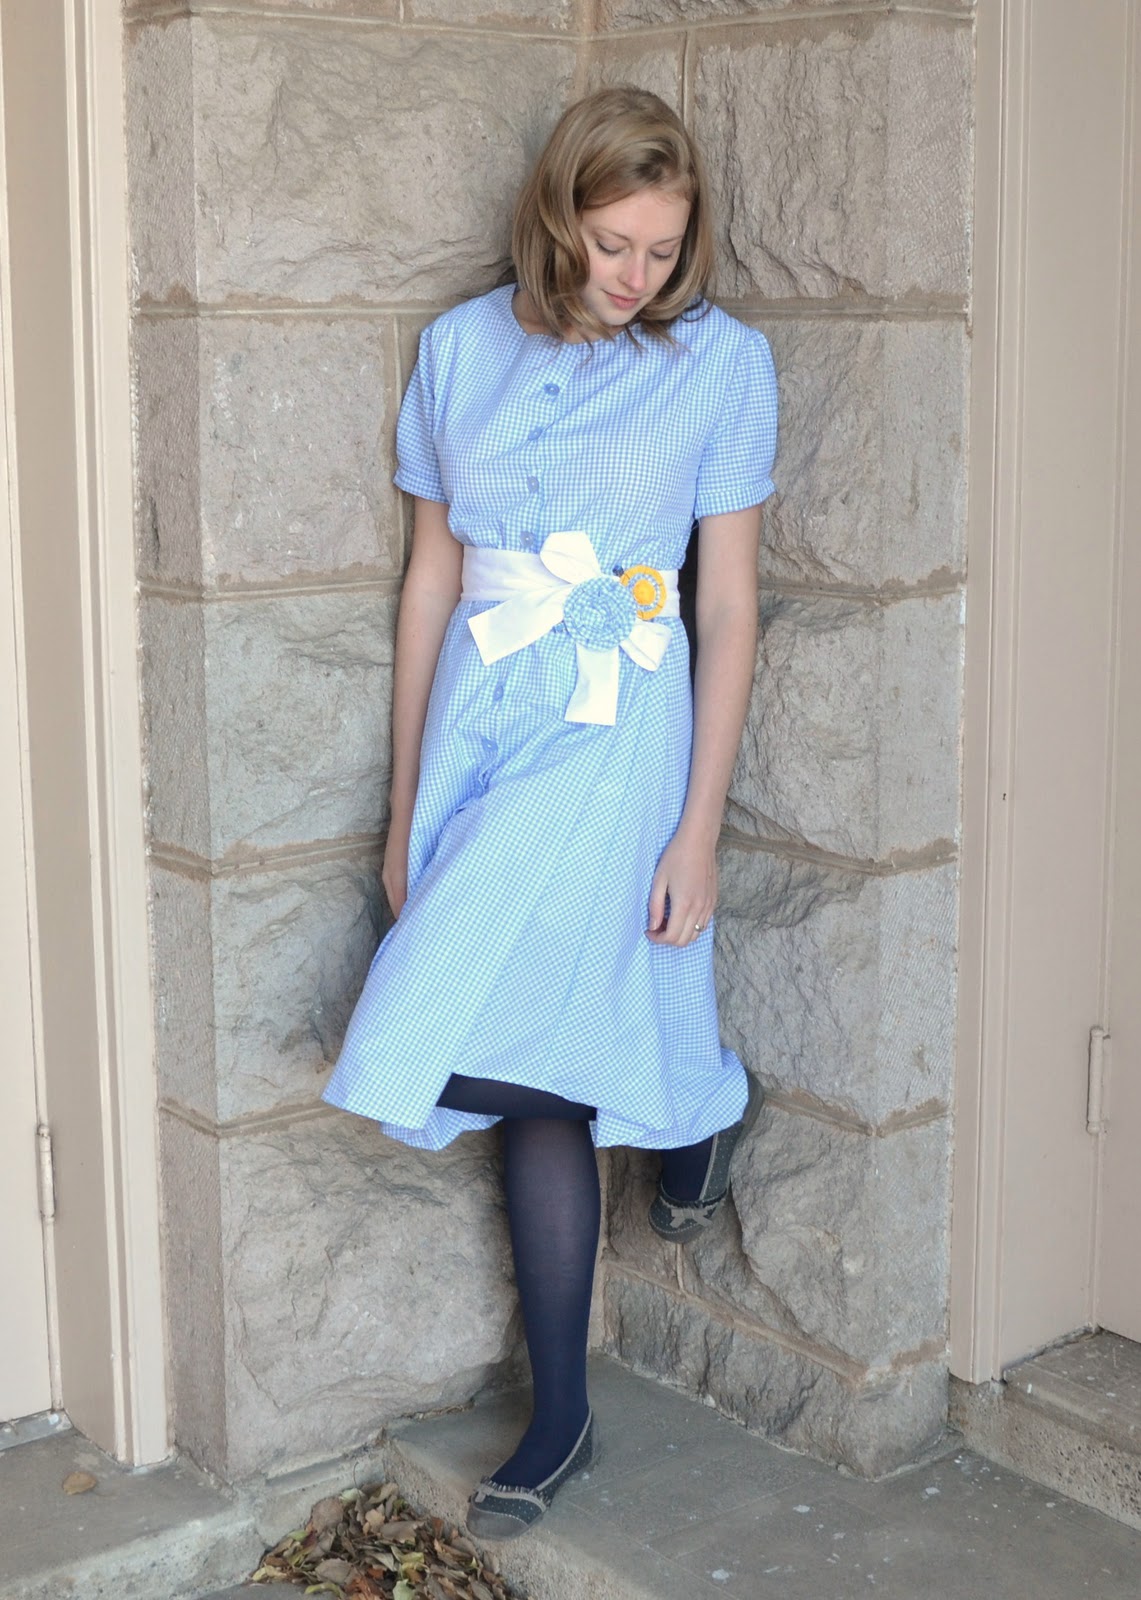 Sewing Our Life Together: 1930s vintage inspired dress